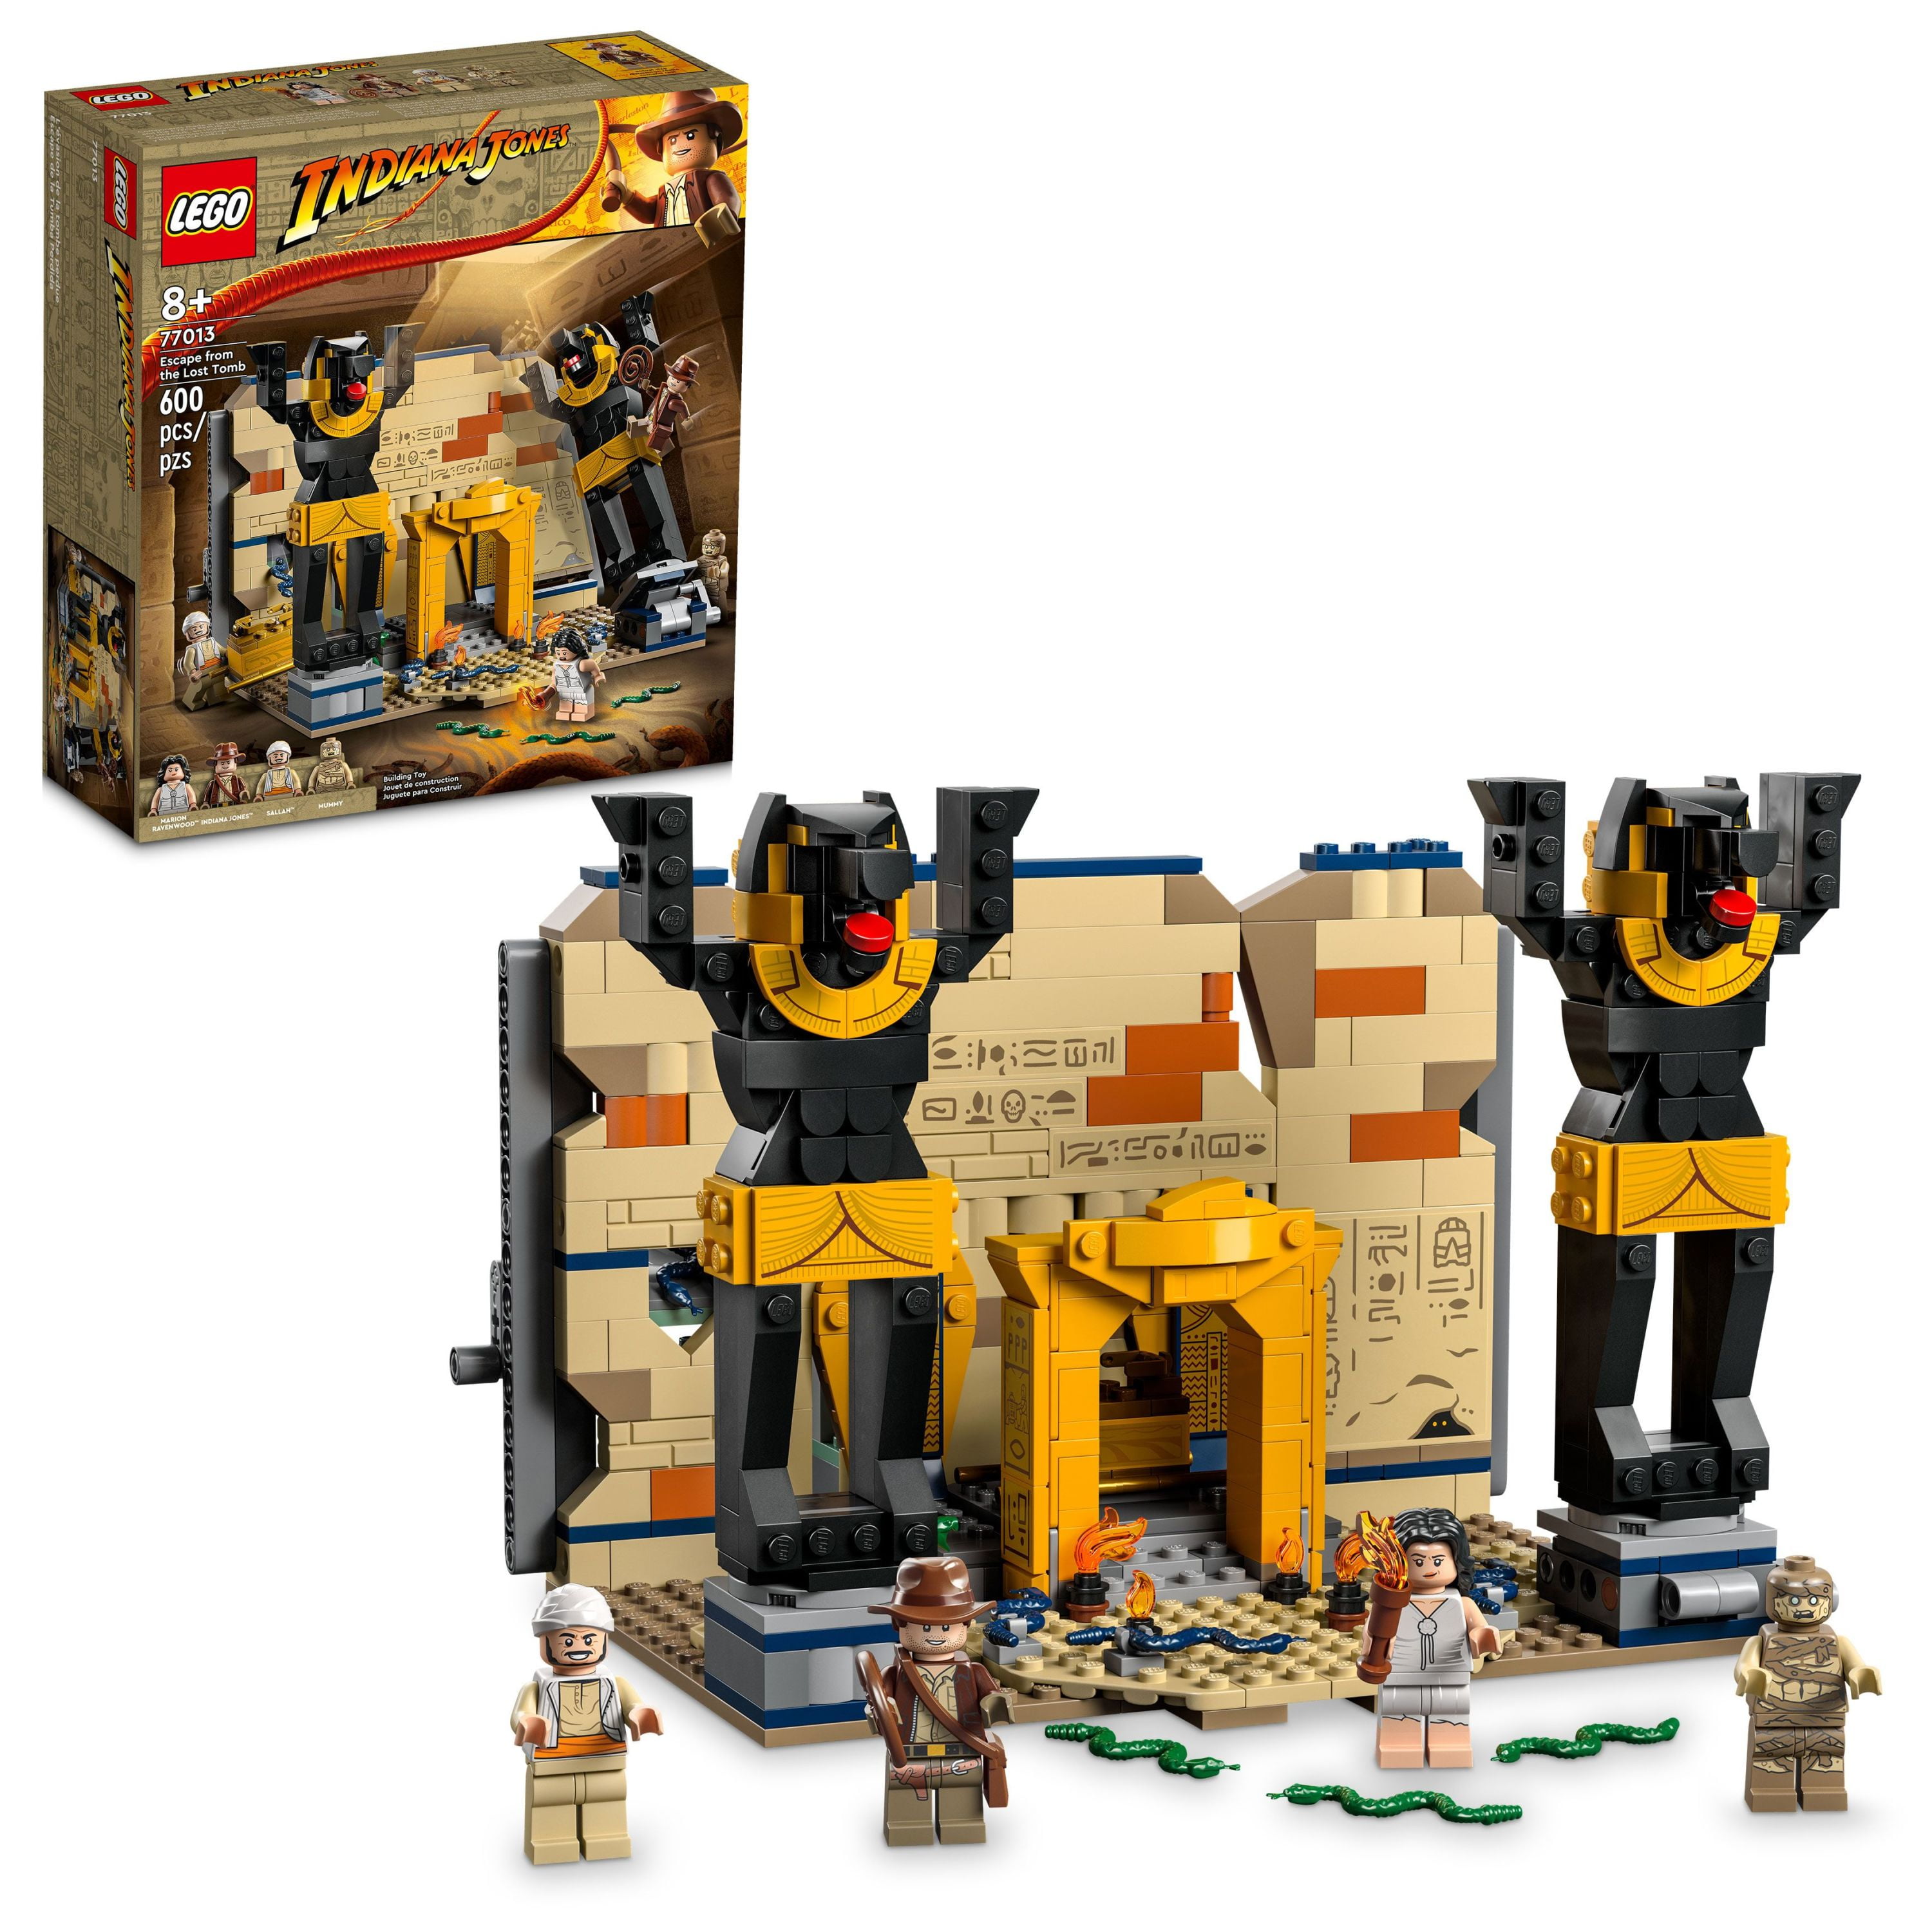 LEGO Indiana Jones Escape from the Lost Tomb 77013 Building Toy, Featuring  a Mummy and an Indiana Jones Minifigure from Raiders of the Lost Ark Movie,  Gift Idea for Kids 8 Years